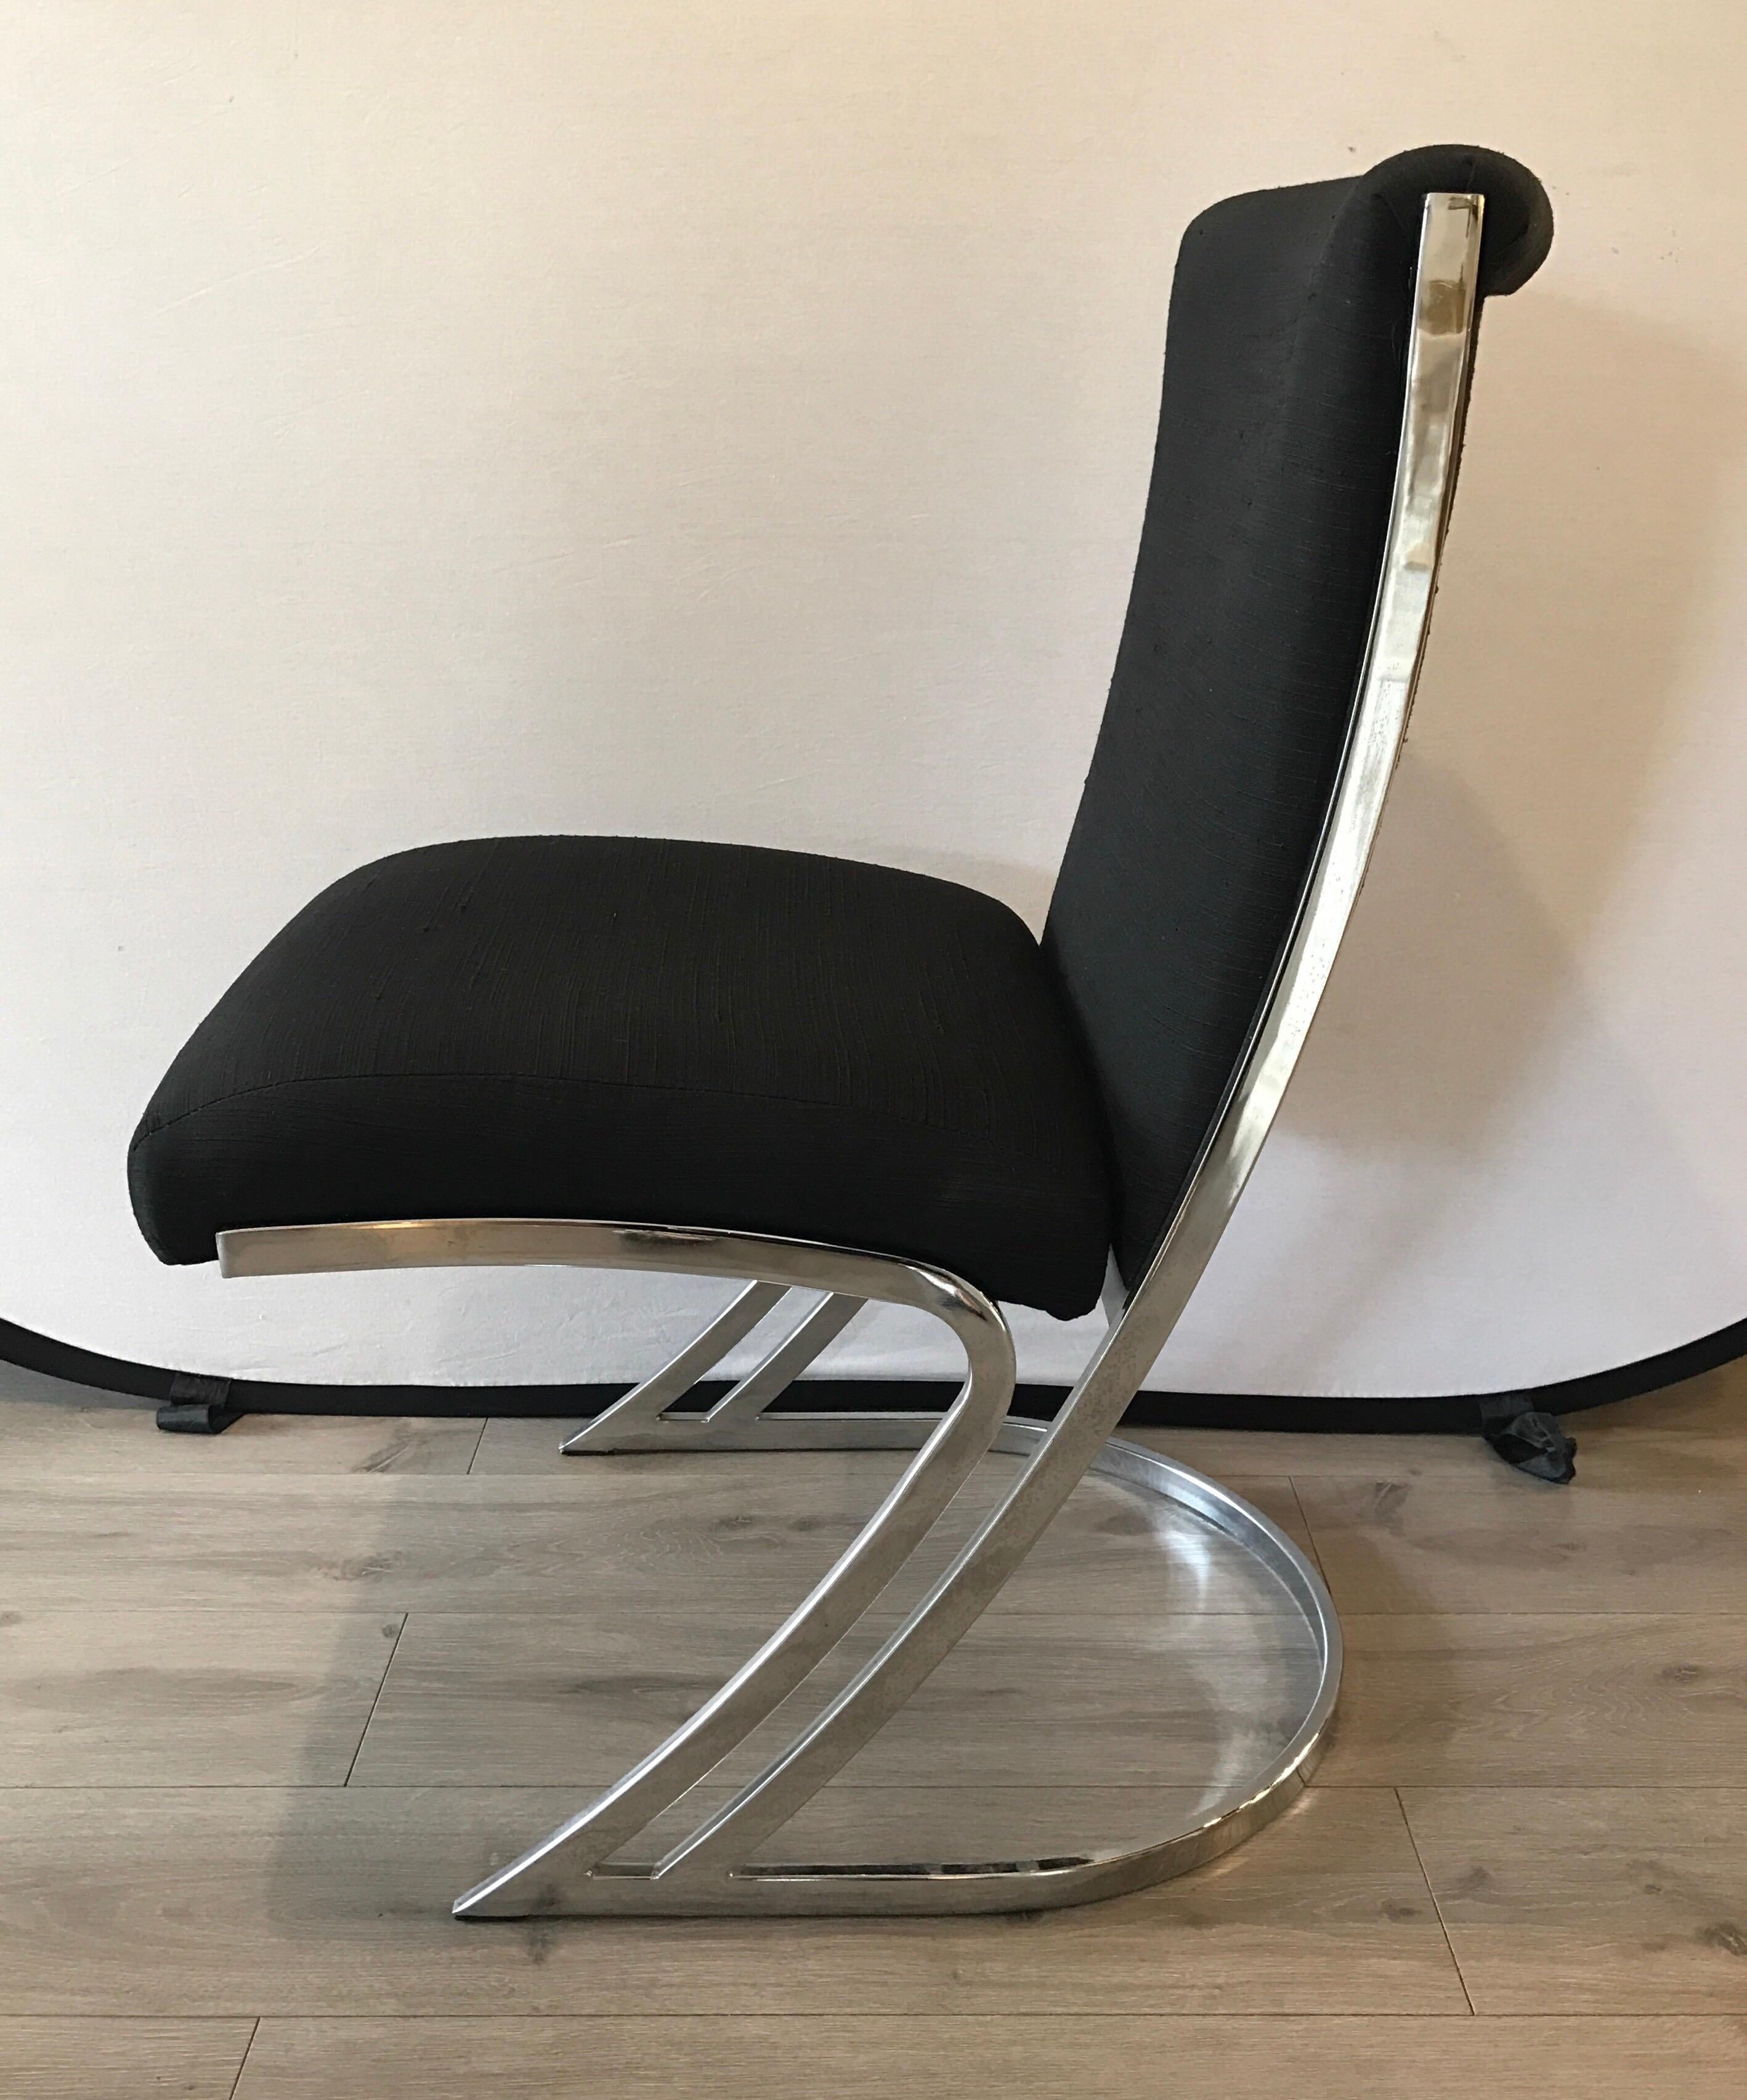 Rare Pierre Cardin midcentury Z chairs in heavy chrome and gorgeous black silk blend upholstery.